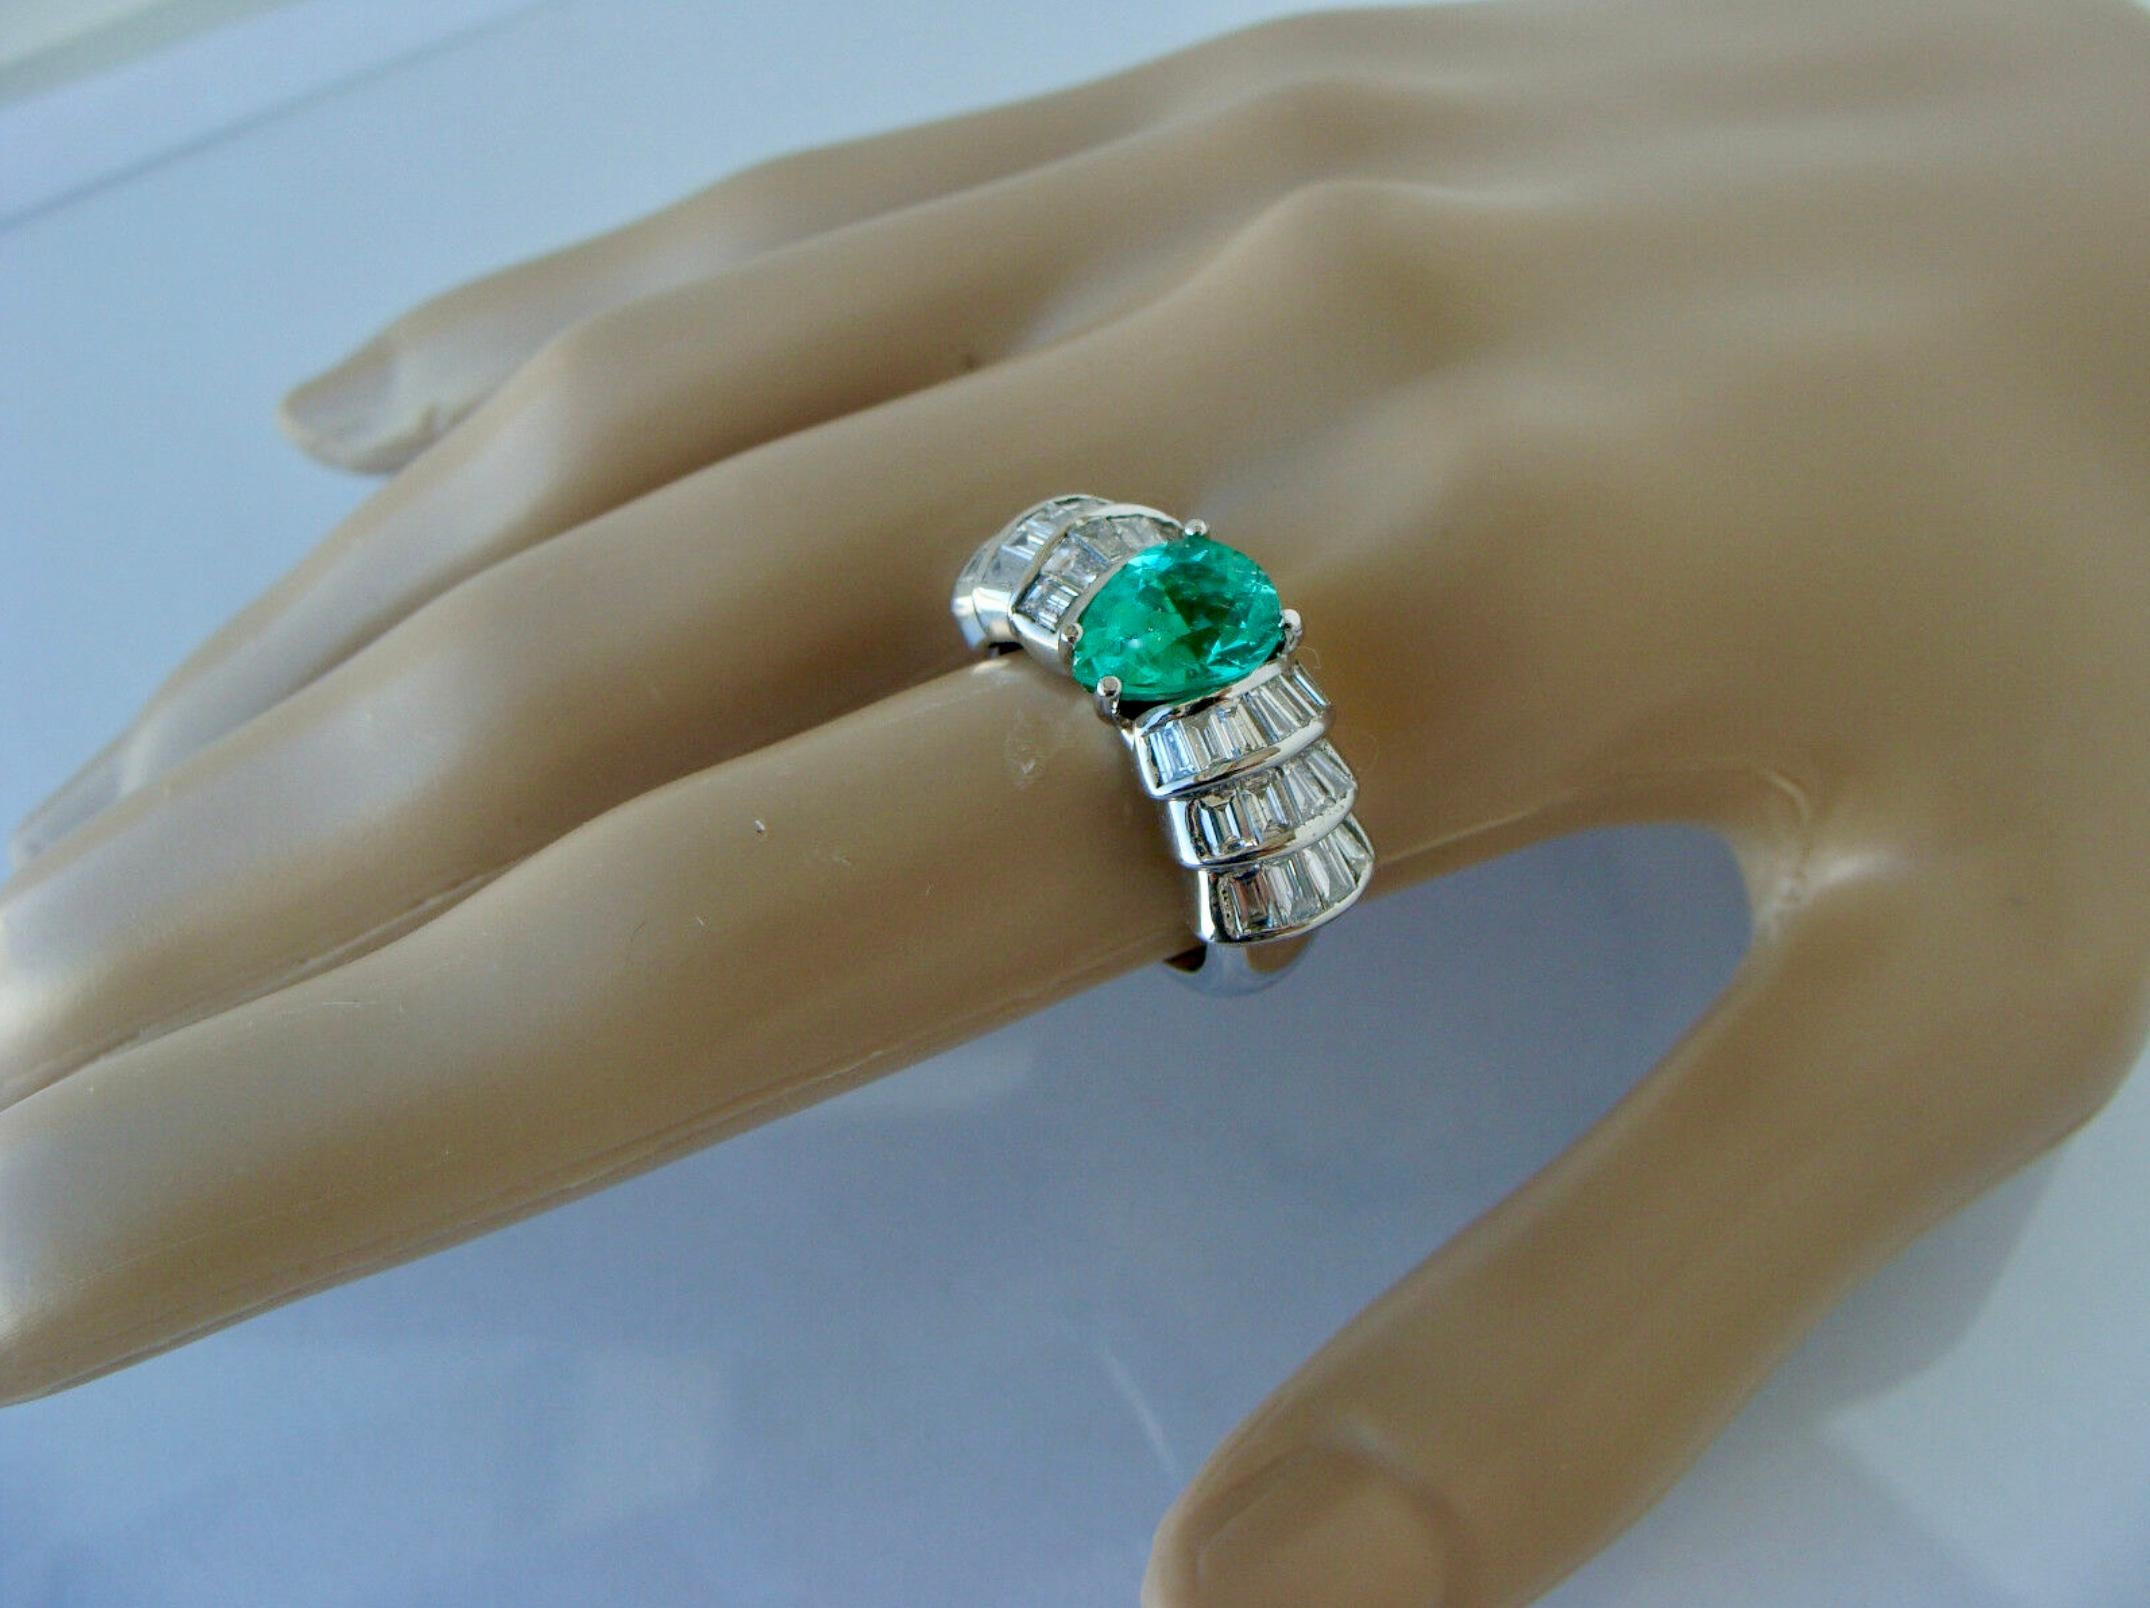 Colombian natural emerald and diamond estate ring. Centre set pear cut Colombian emerald flanked by baguette-cut diamonds in a white gold setting. The emerald is a beautiful fresh green colour and the diamonds are bright white and have a lively